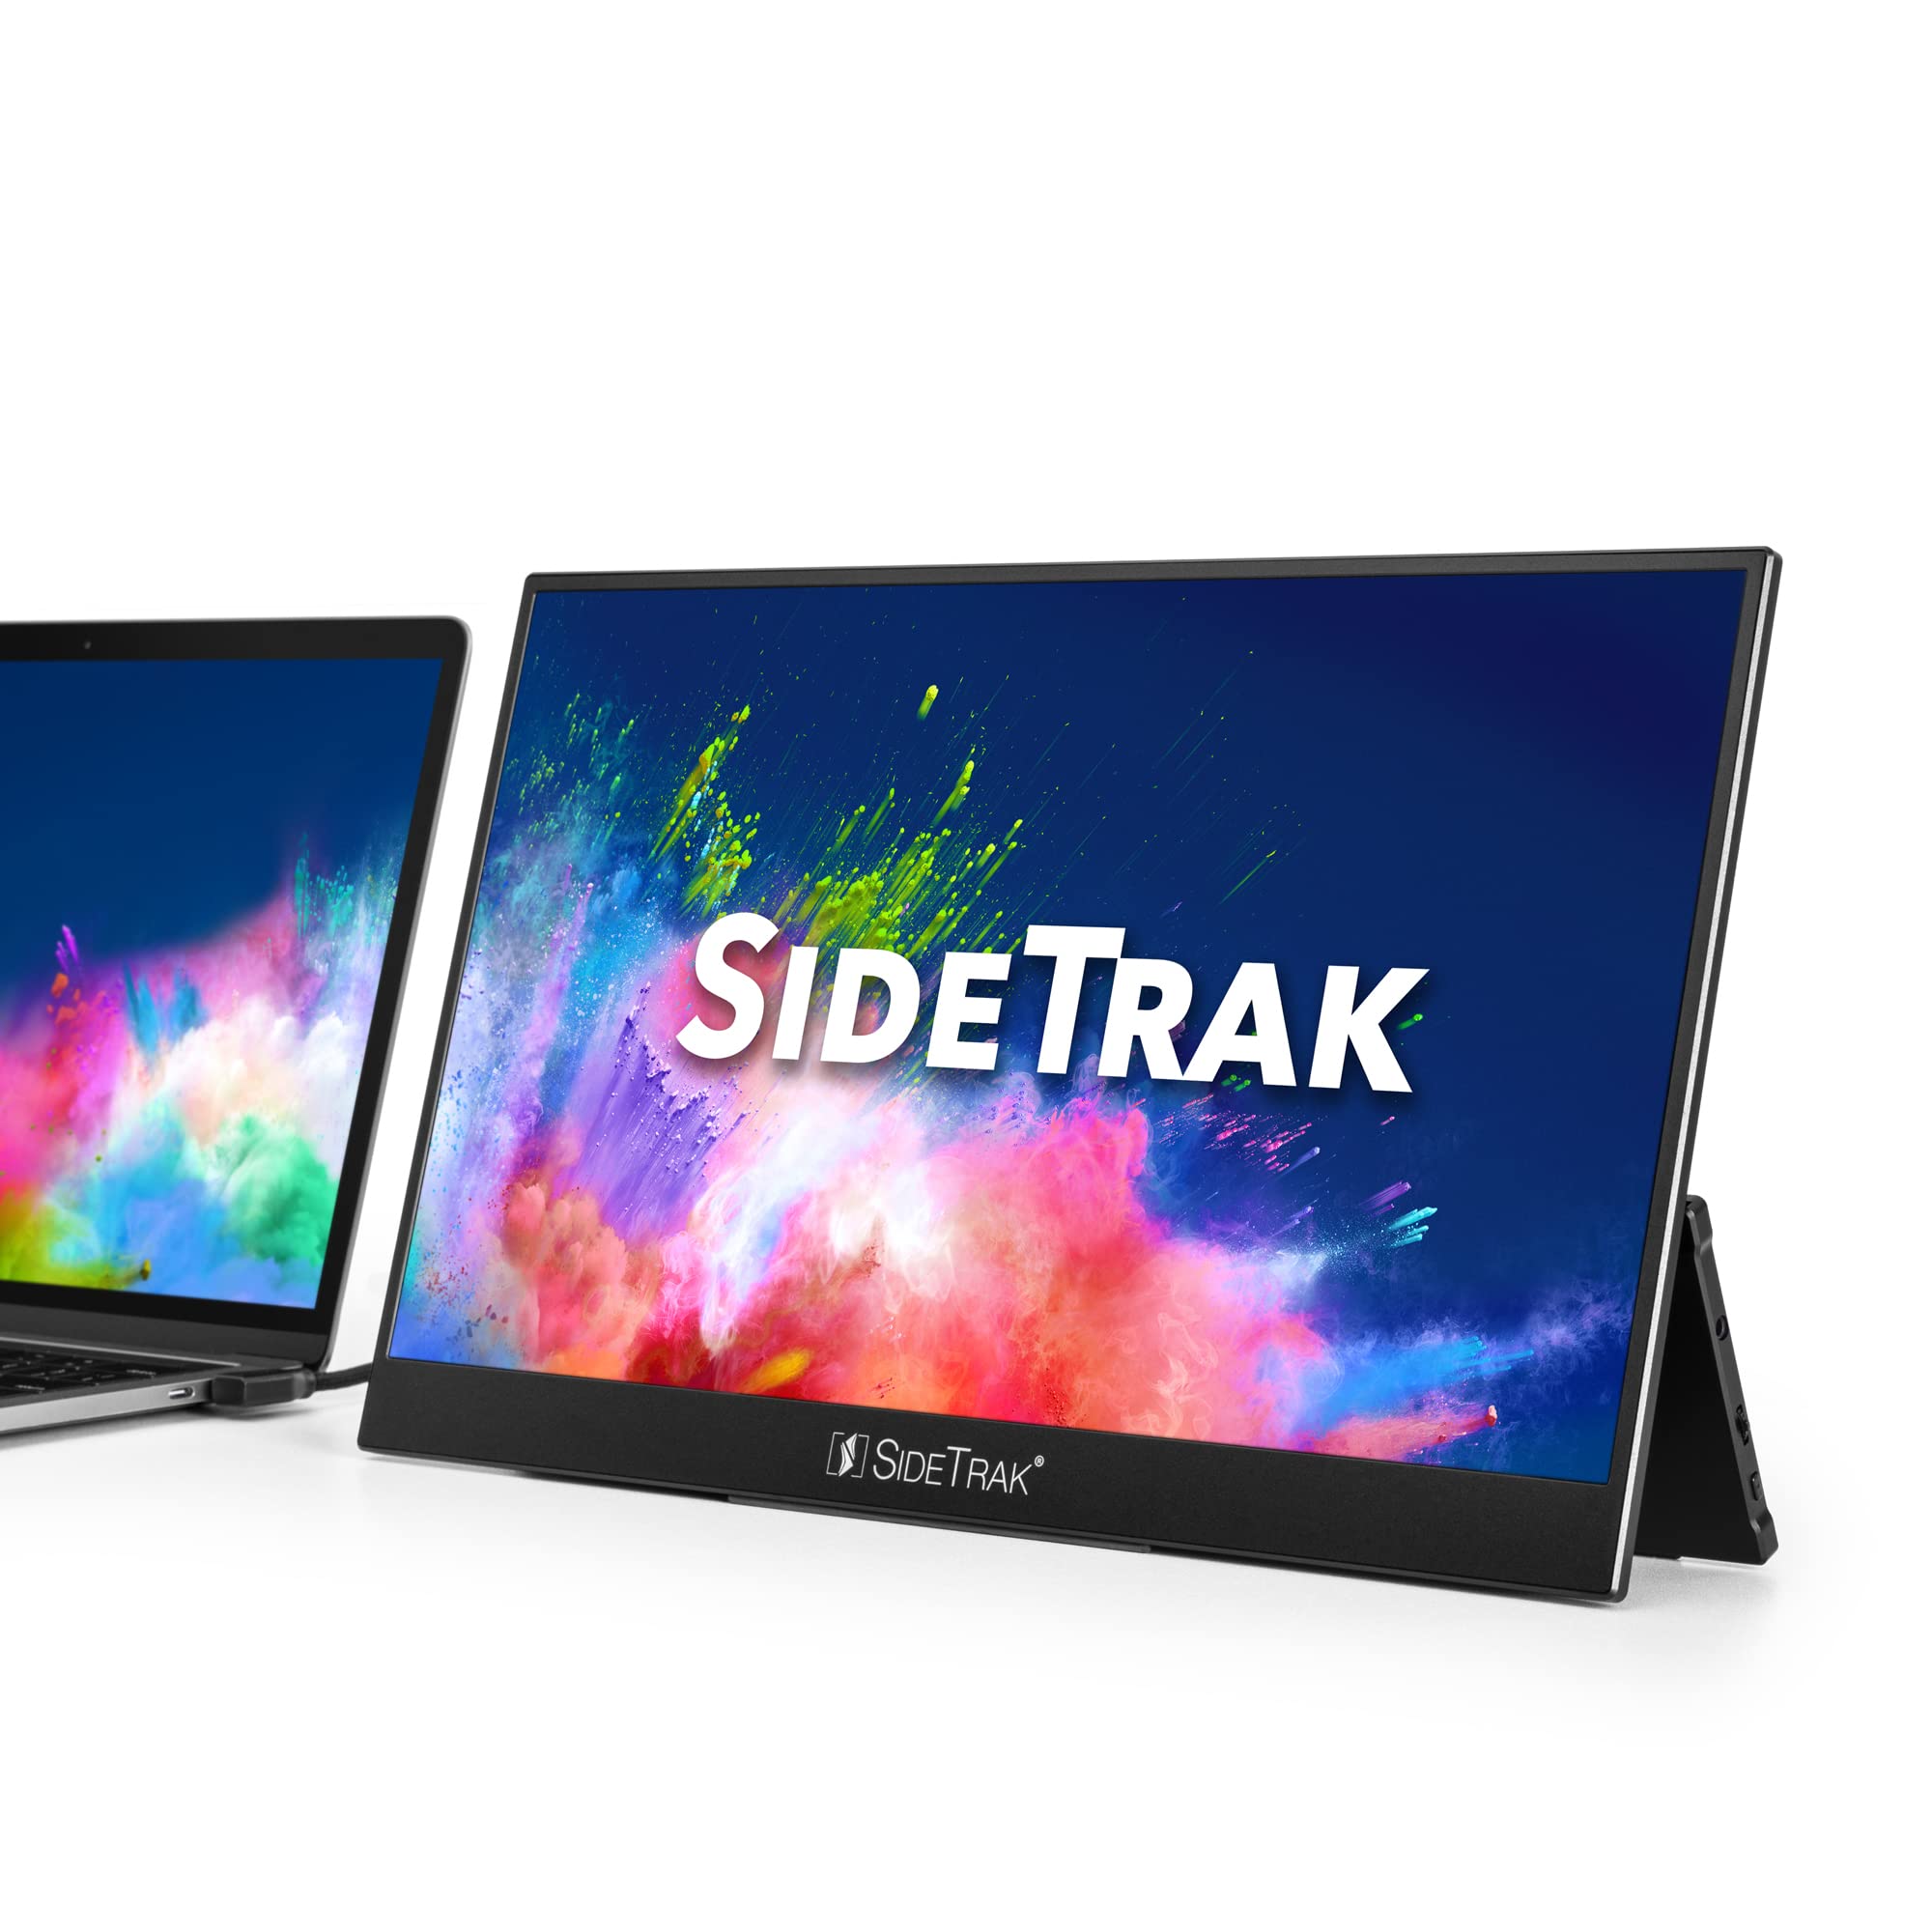 SideTrakSolo Pro Portable Monitor 15.8 FHD 1080P LED Anti-Glare IPS Screen Works with MacPCChrome PS4 Xbox